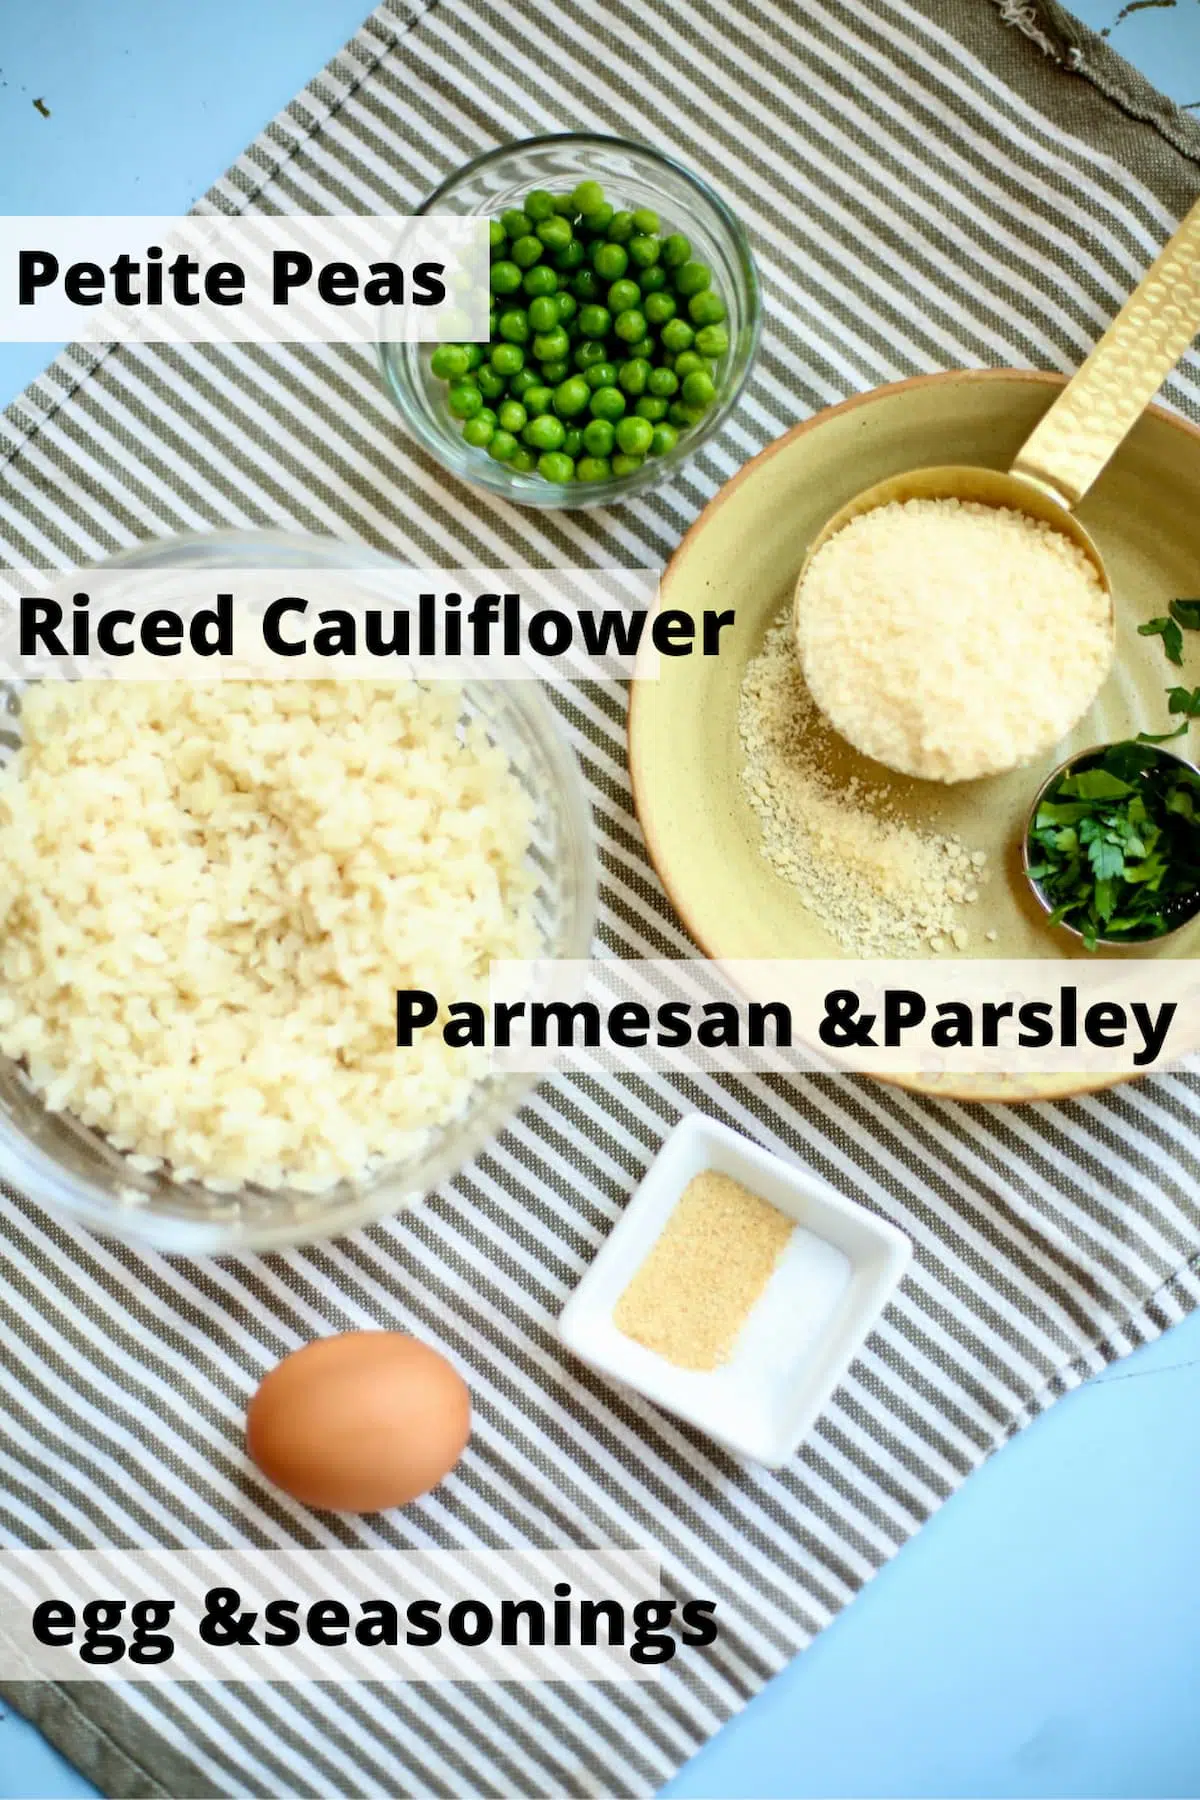 a table with ingredients, cauliflower, parmesan cheese and an egg and seasonings,